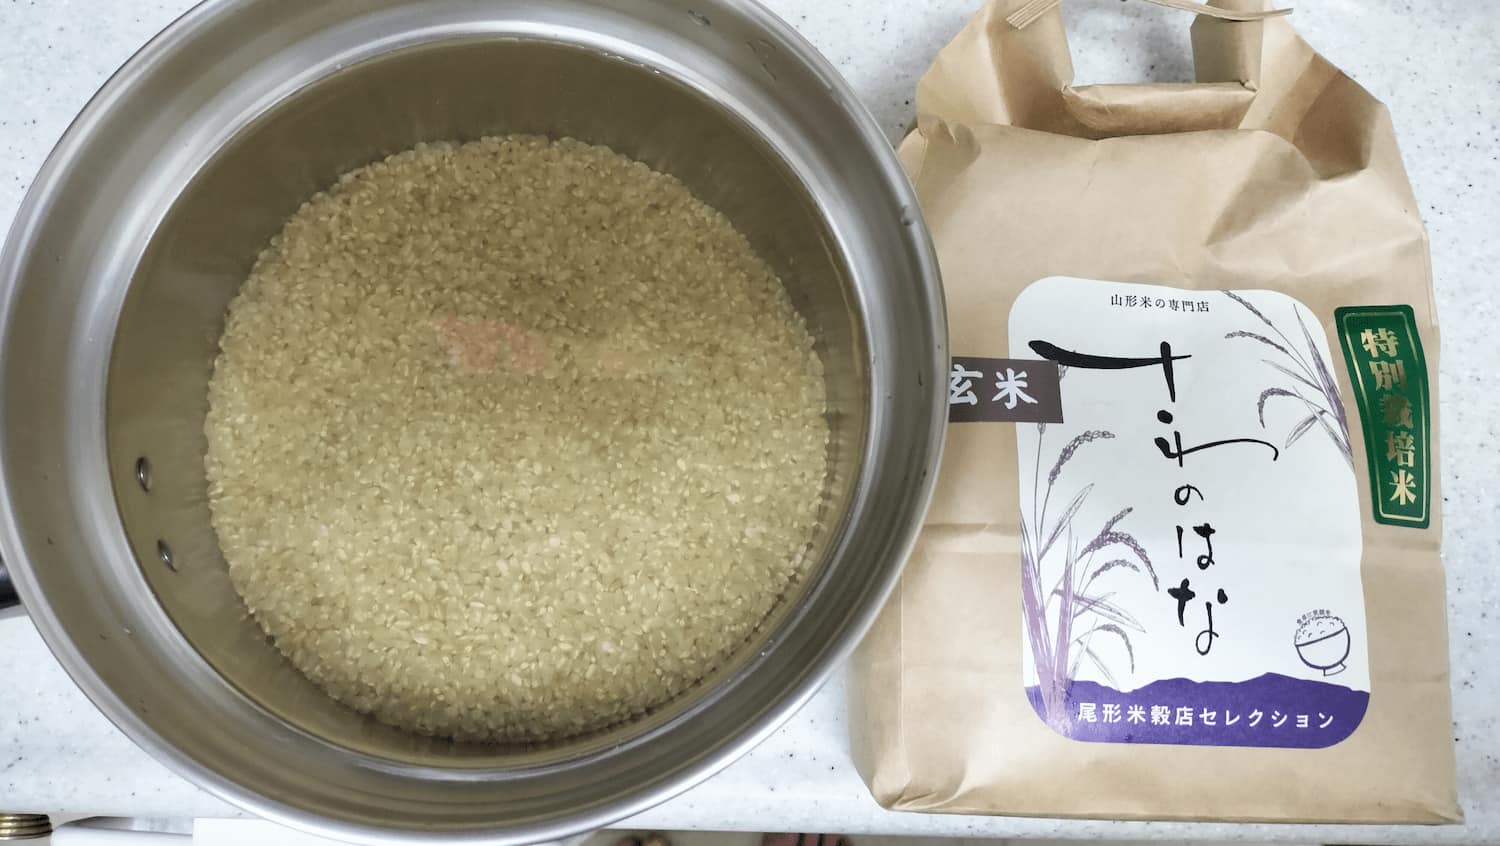 Brown rice variety "Sawanohana" soaked in plenty of water in a pot.